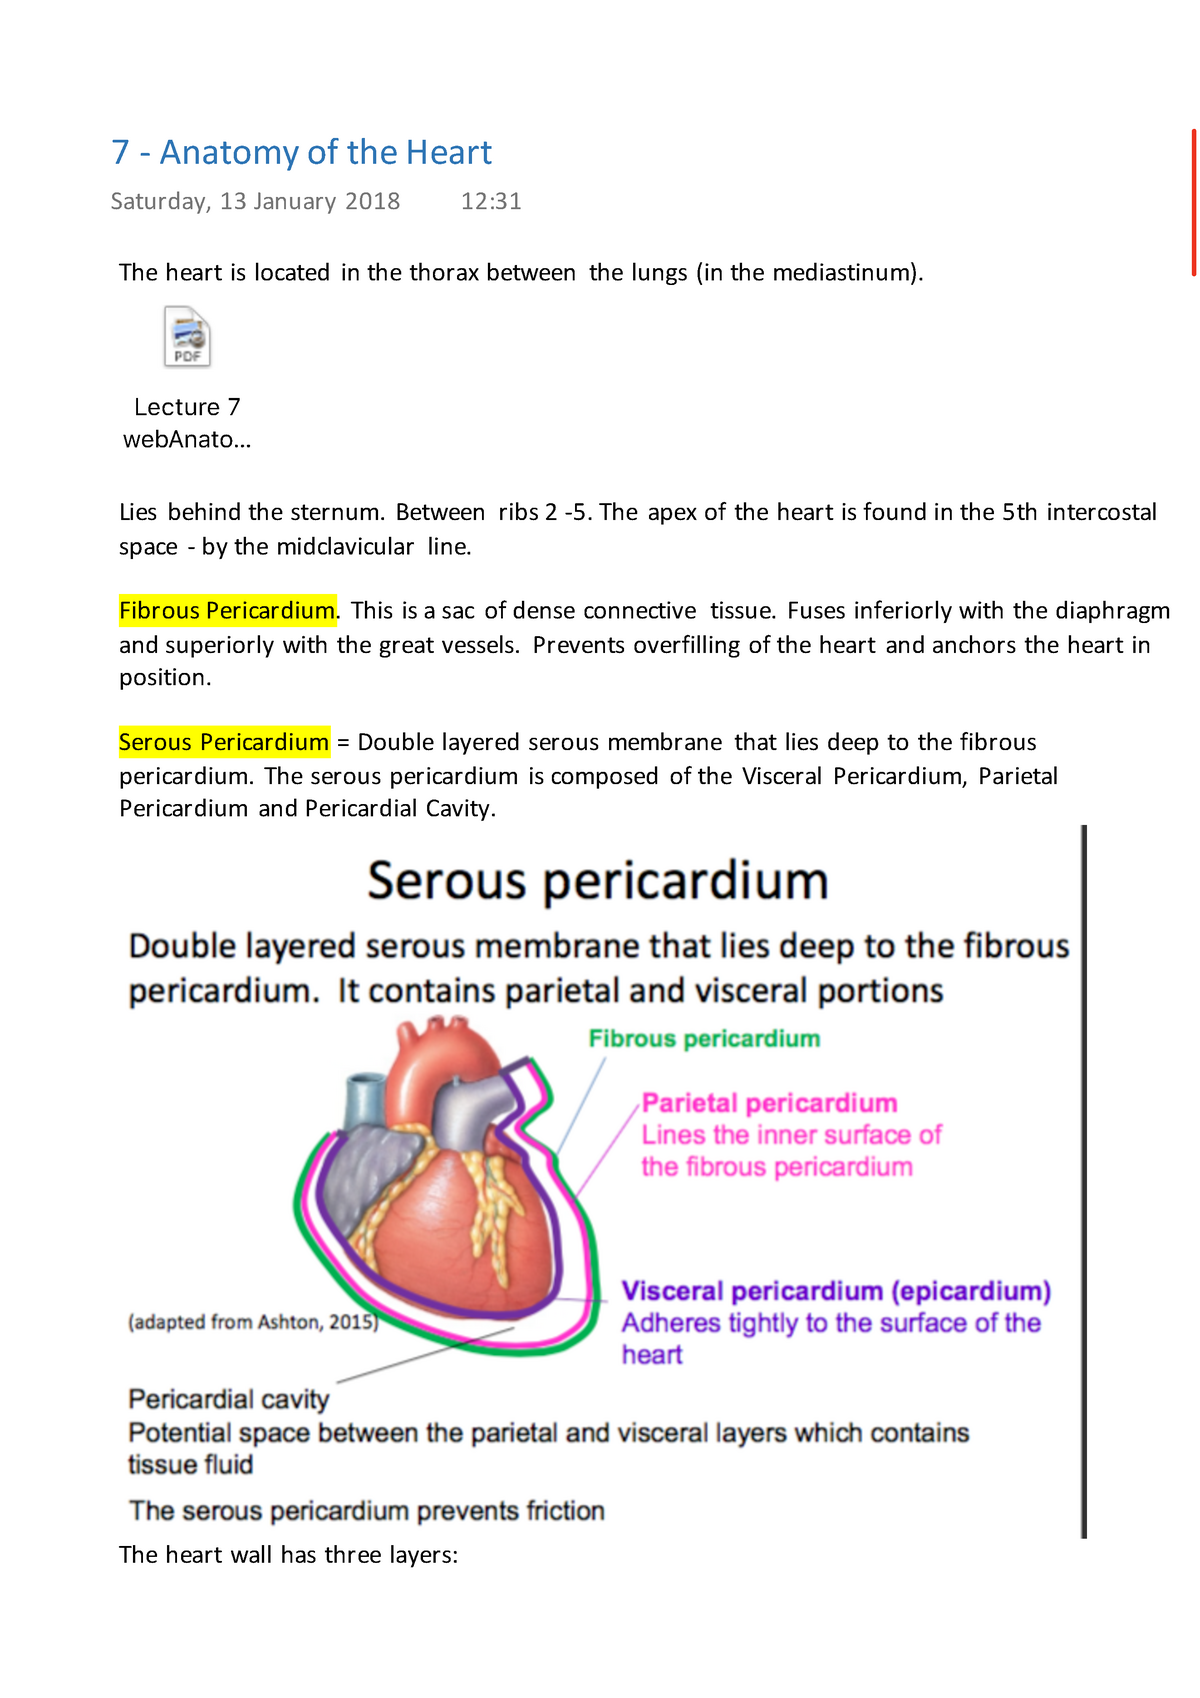 7 - Anatomy of the Heart - Lecture notes 7 - StuDocu